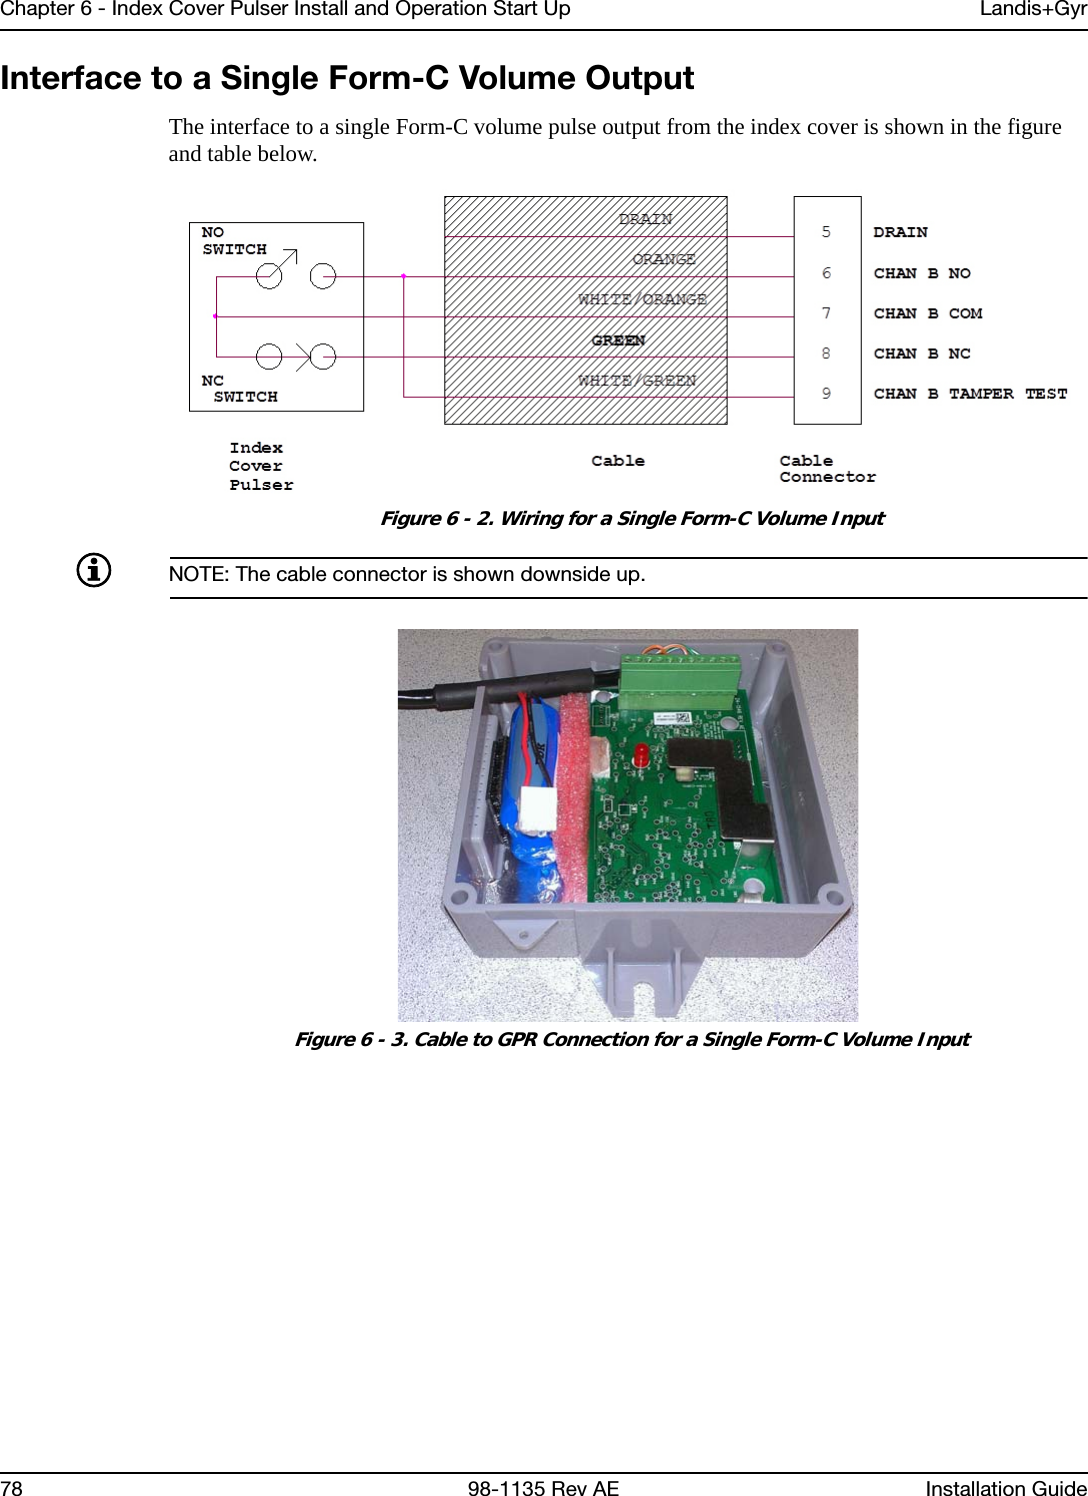 Chapter 6 - Index Cover Pulser Install and Operation Start Up Landis+Gyr78 98-1135 Rev AE Installation GuideInterface to a Single Form-C Volume OutputThe interface to a single Form-C volume pulse output from the index cover is shown in the figure and table below. Figure 6 - 2. Wiring for a Single Form-C Volume InputNOTE: The cable connector is shown downside up. Figure 6 - 3. Cable to GPR Connection for a Single Form-C Volume Input